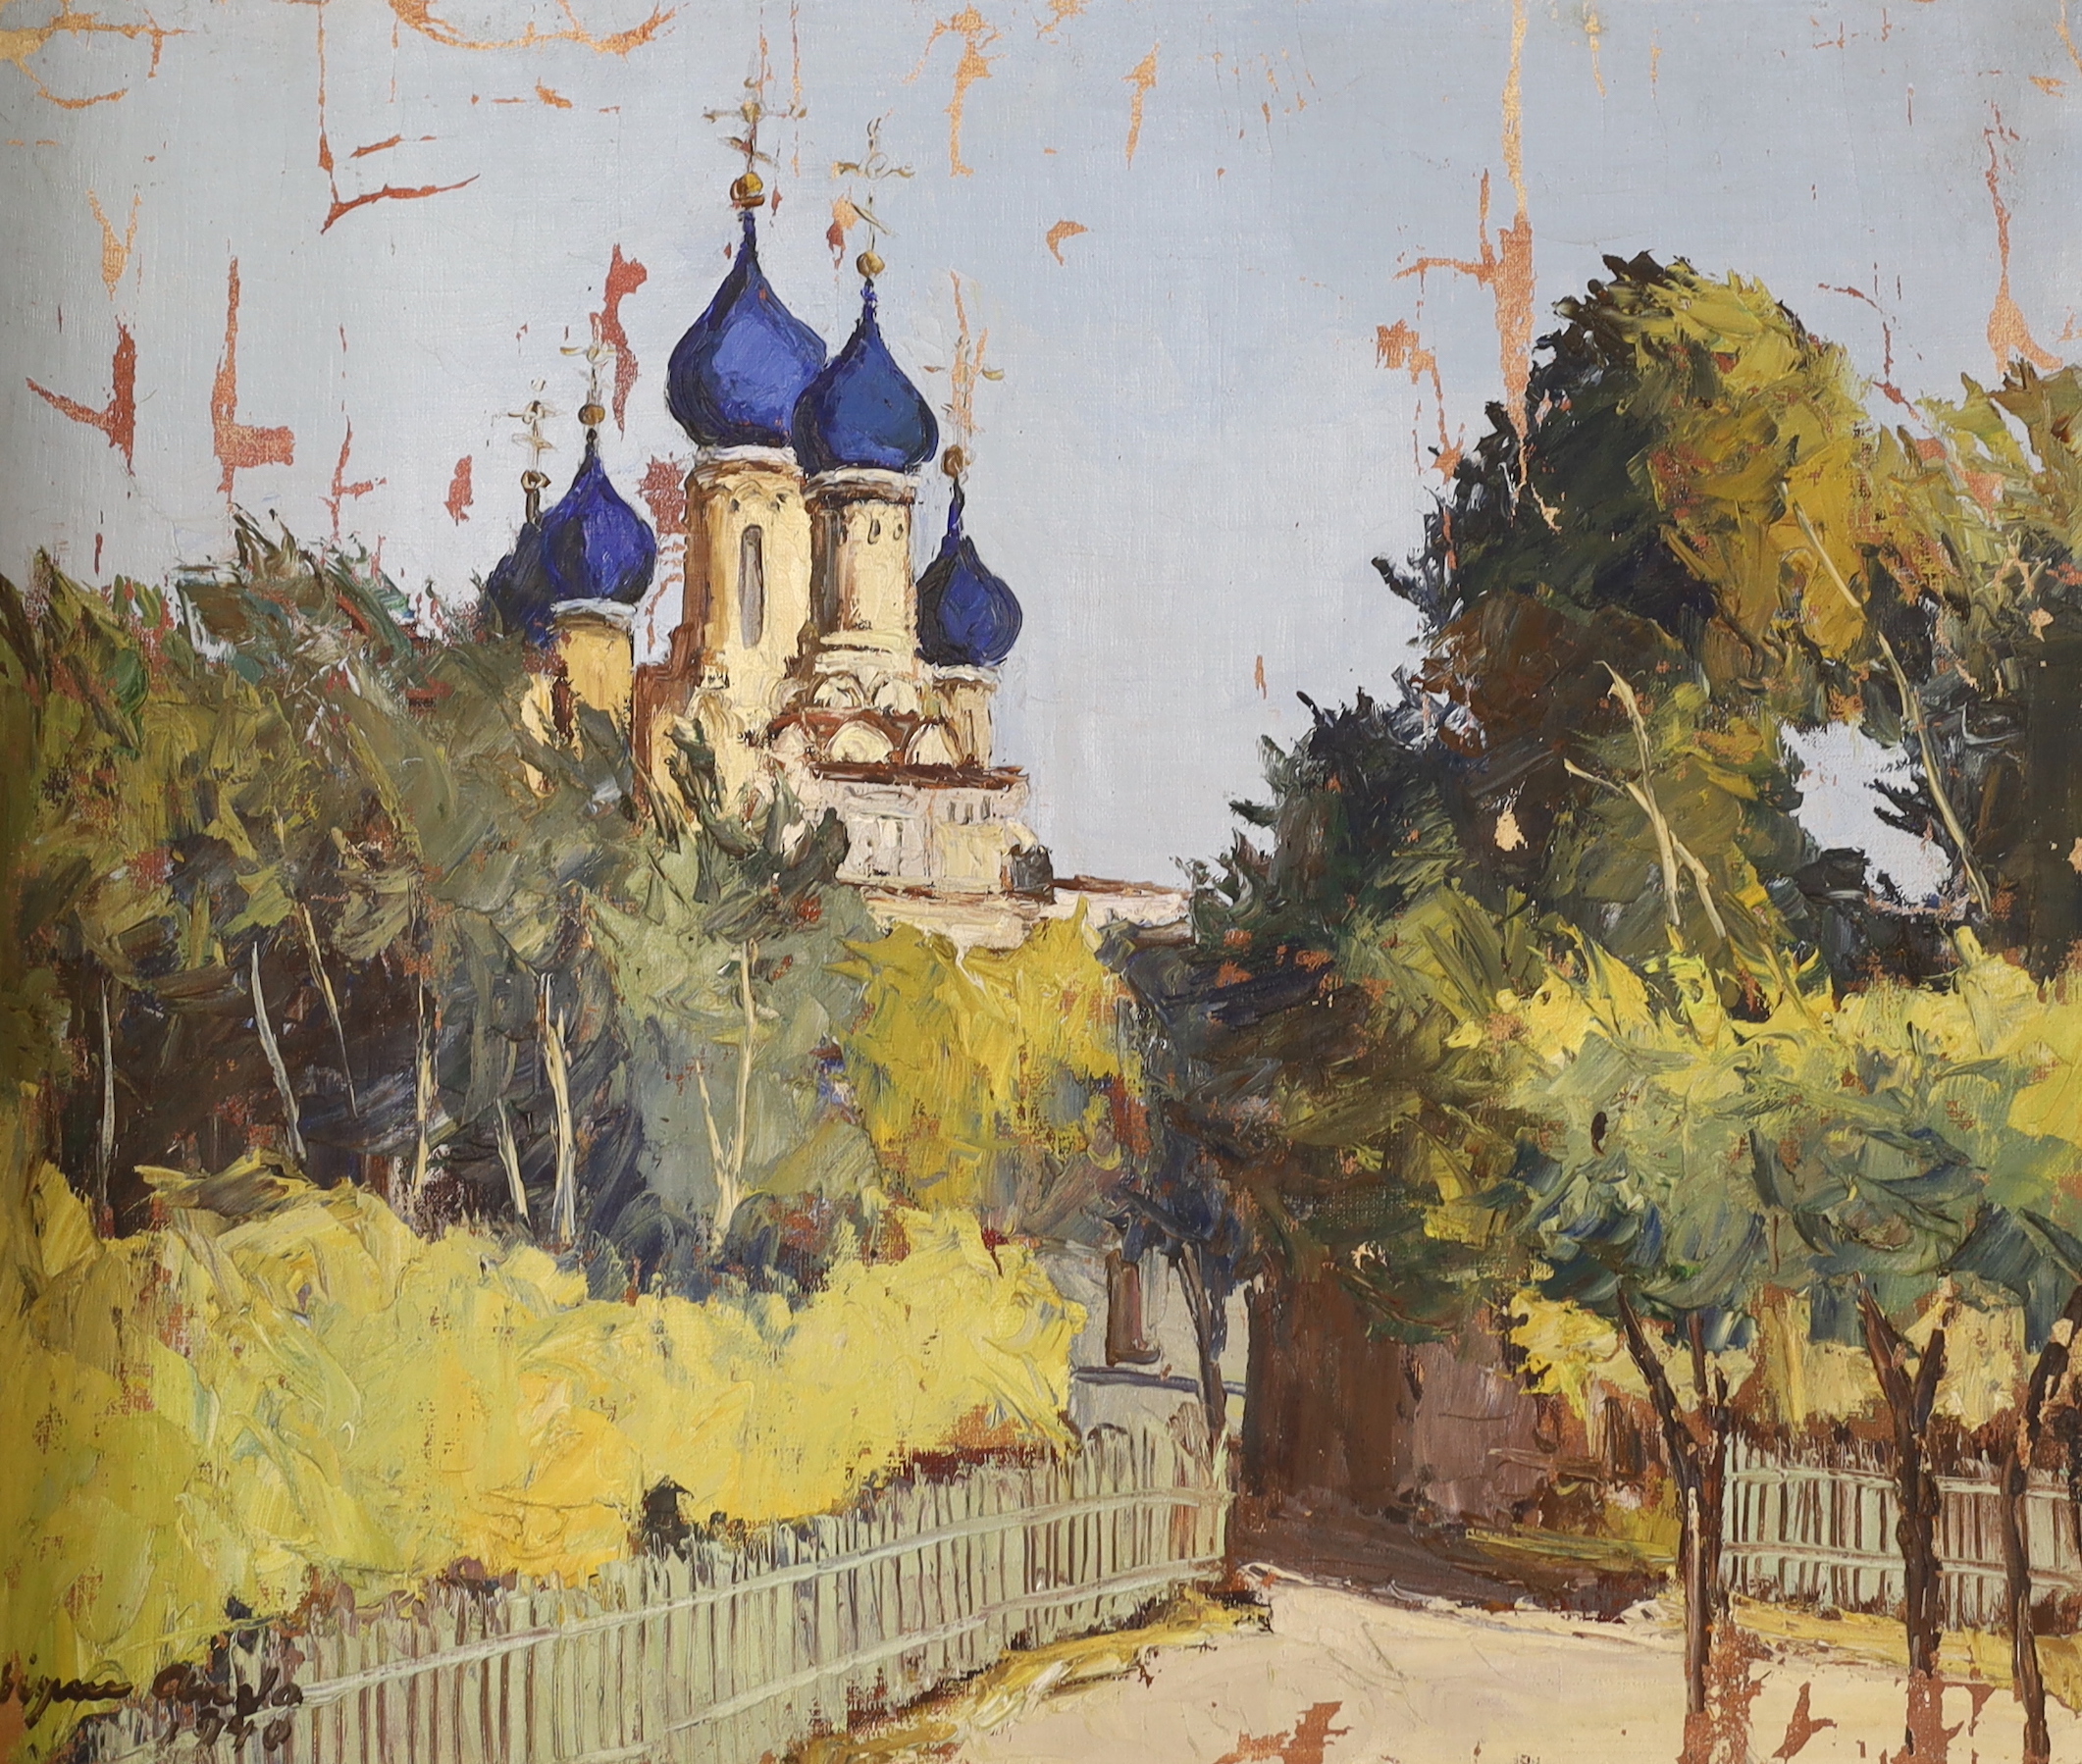 Impressionist oil on unstretched canvas, 'Shanghai, St Nicholas Church', indistinctly signed and dated 1940, 54 x 63cm